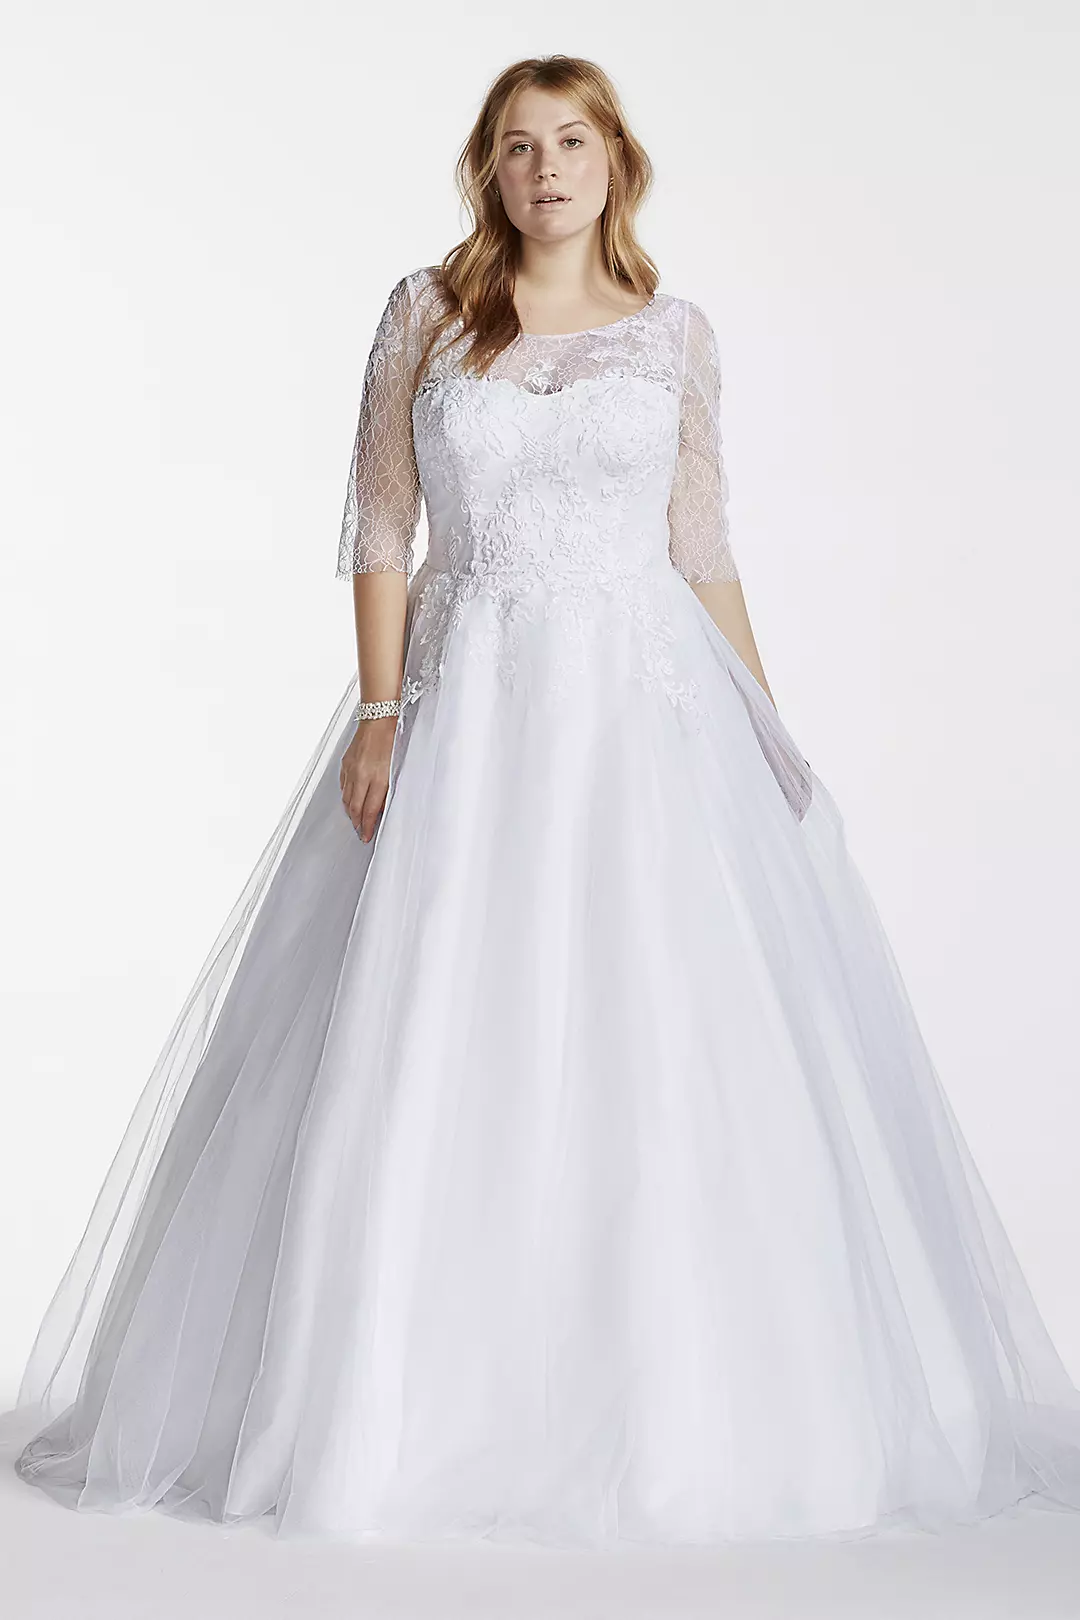 As-Is Plus Size Wedding Dress with Illusion Bodice Image